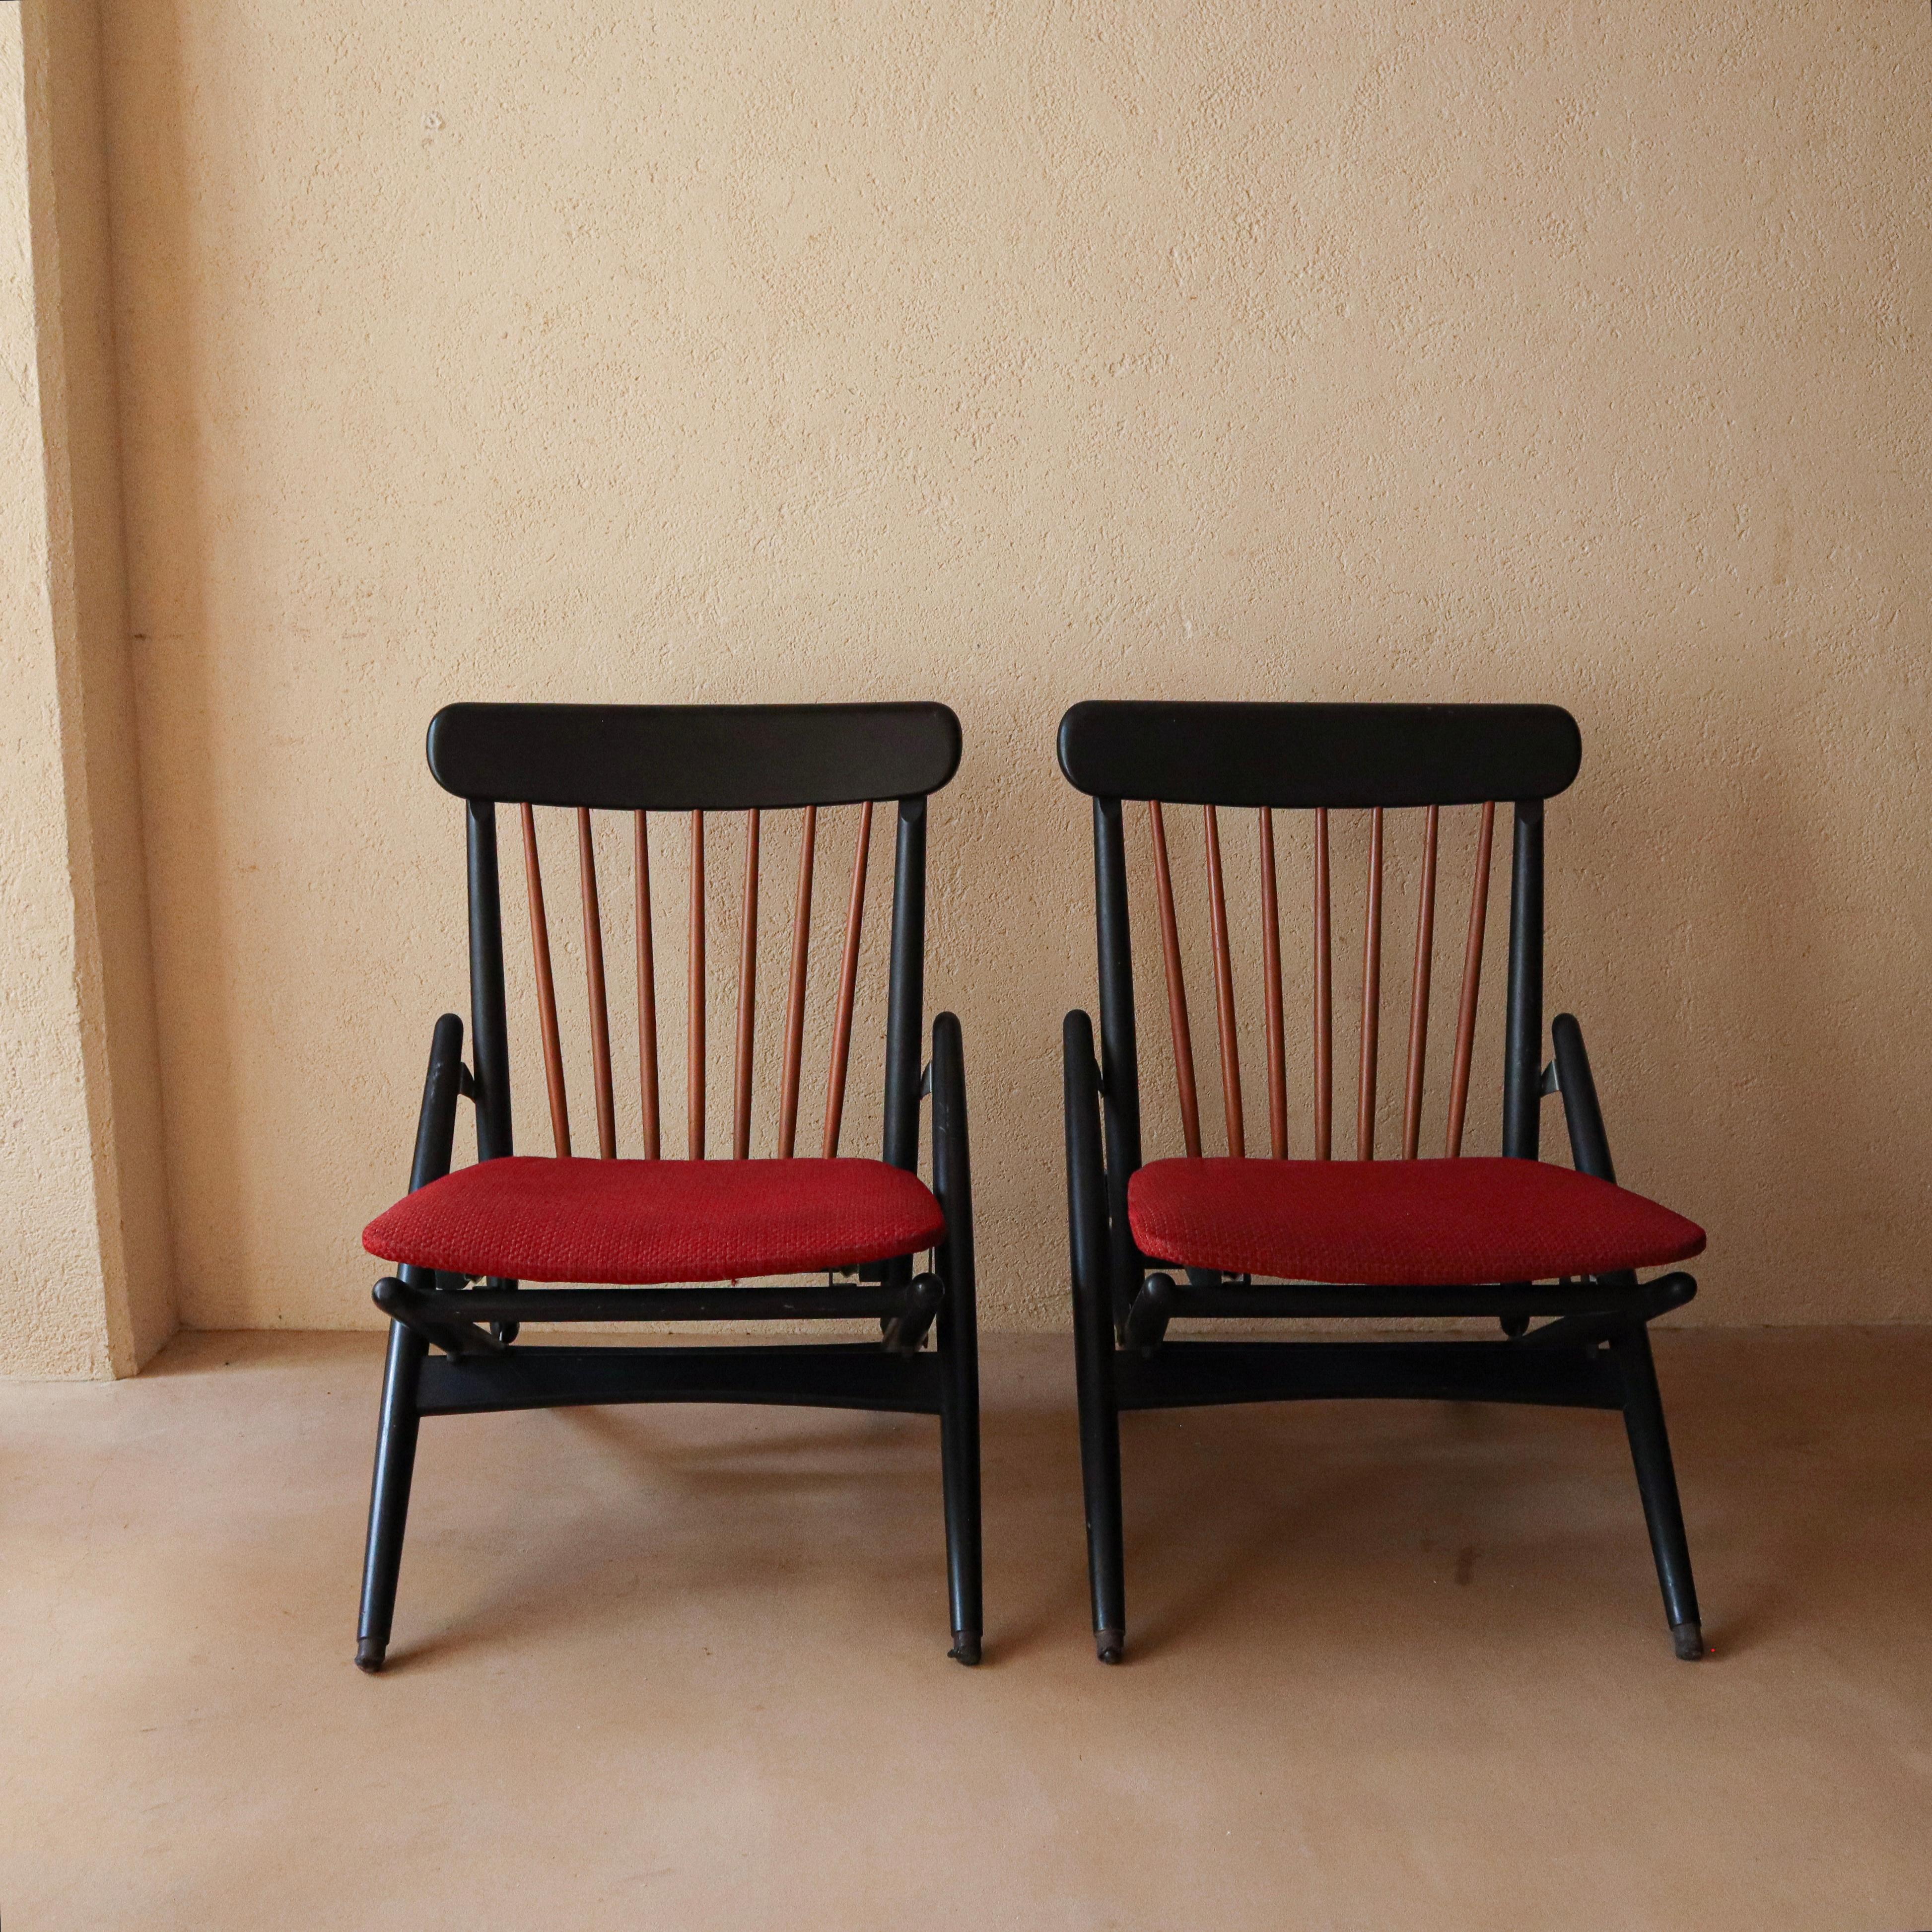 Mid-Century Modern Japanese Midcentury Rare Pair of Maruni Folding Lounge Chairs For Sale